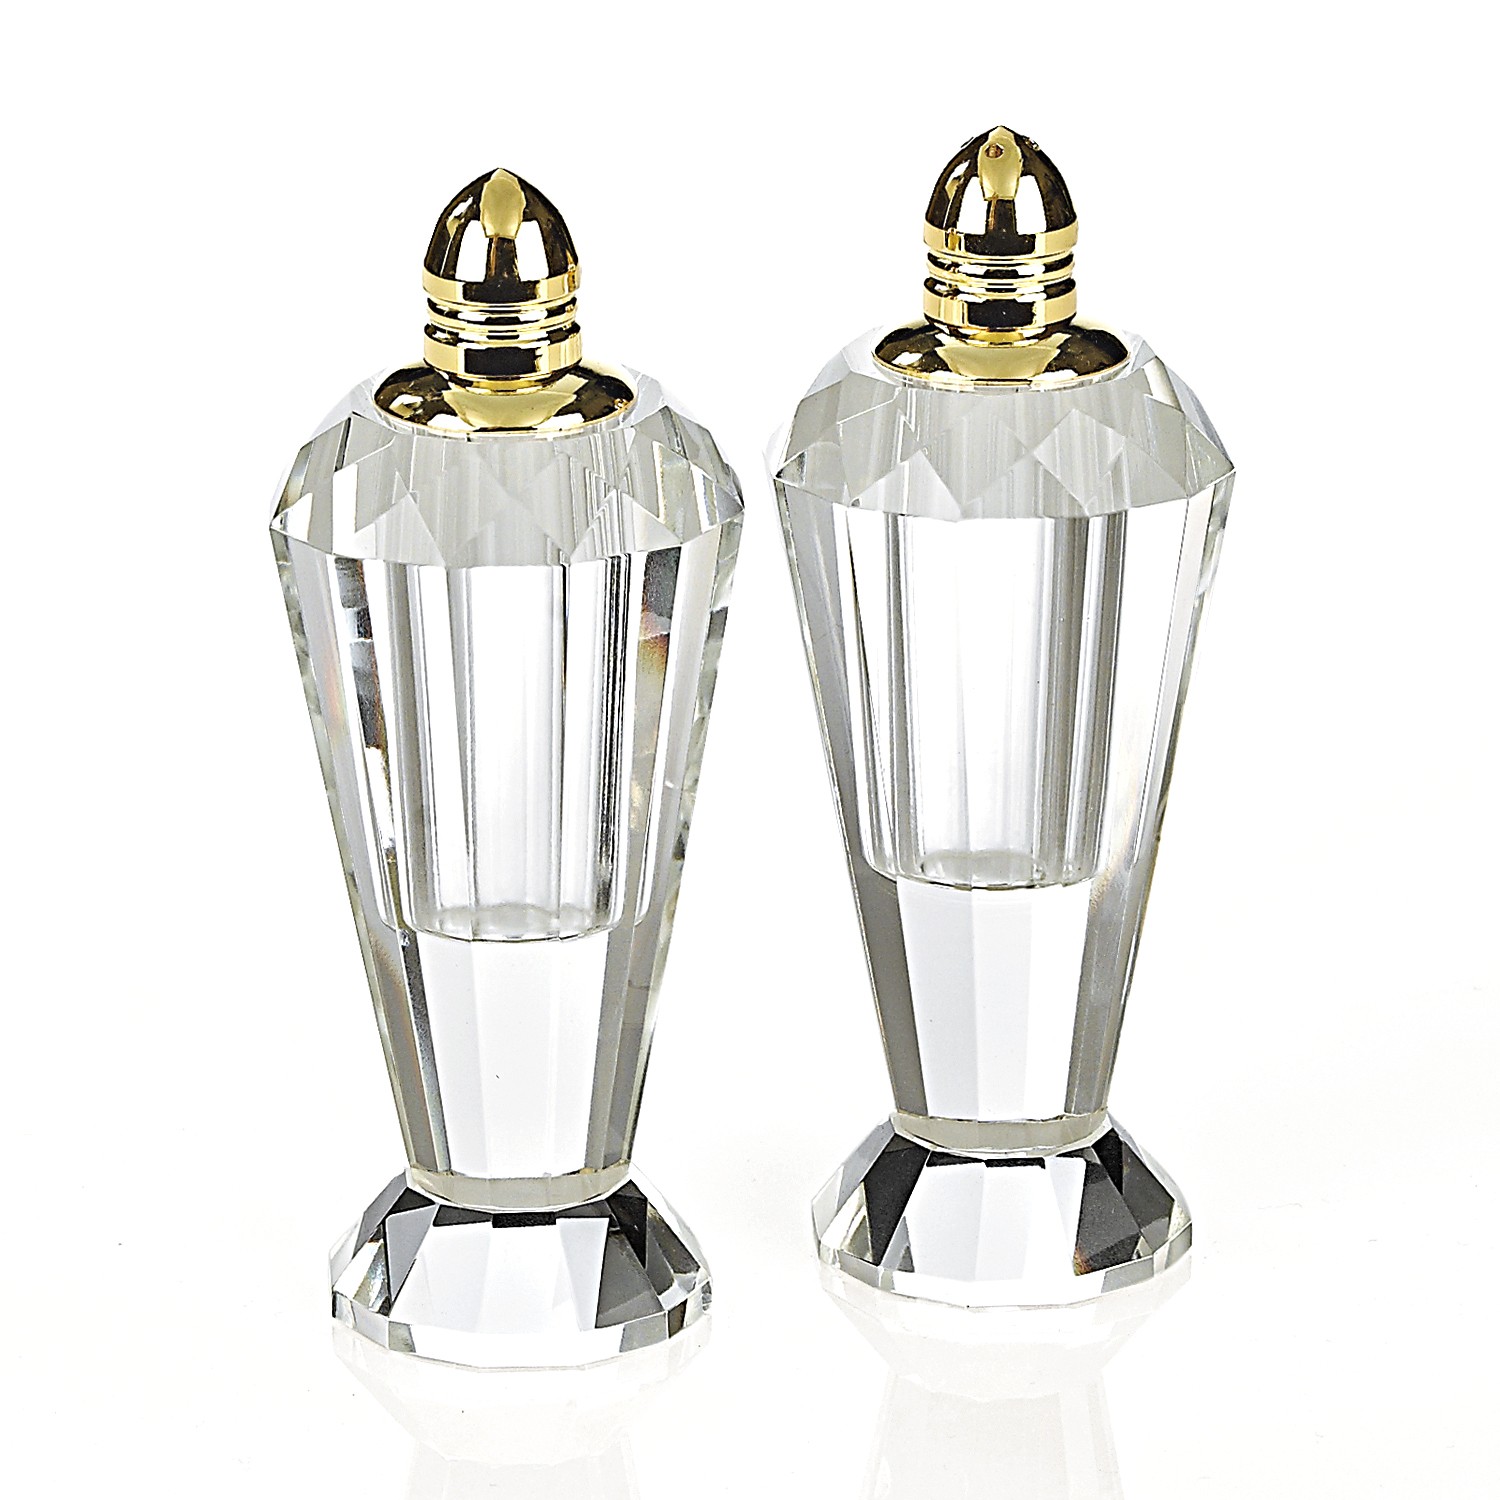 Handcrafted Optical Crystal and Gold Pair of Salt & Pepper Shakers